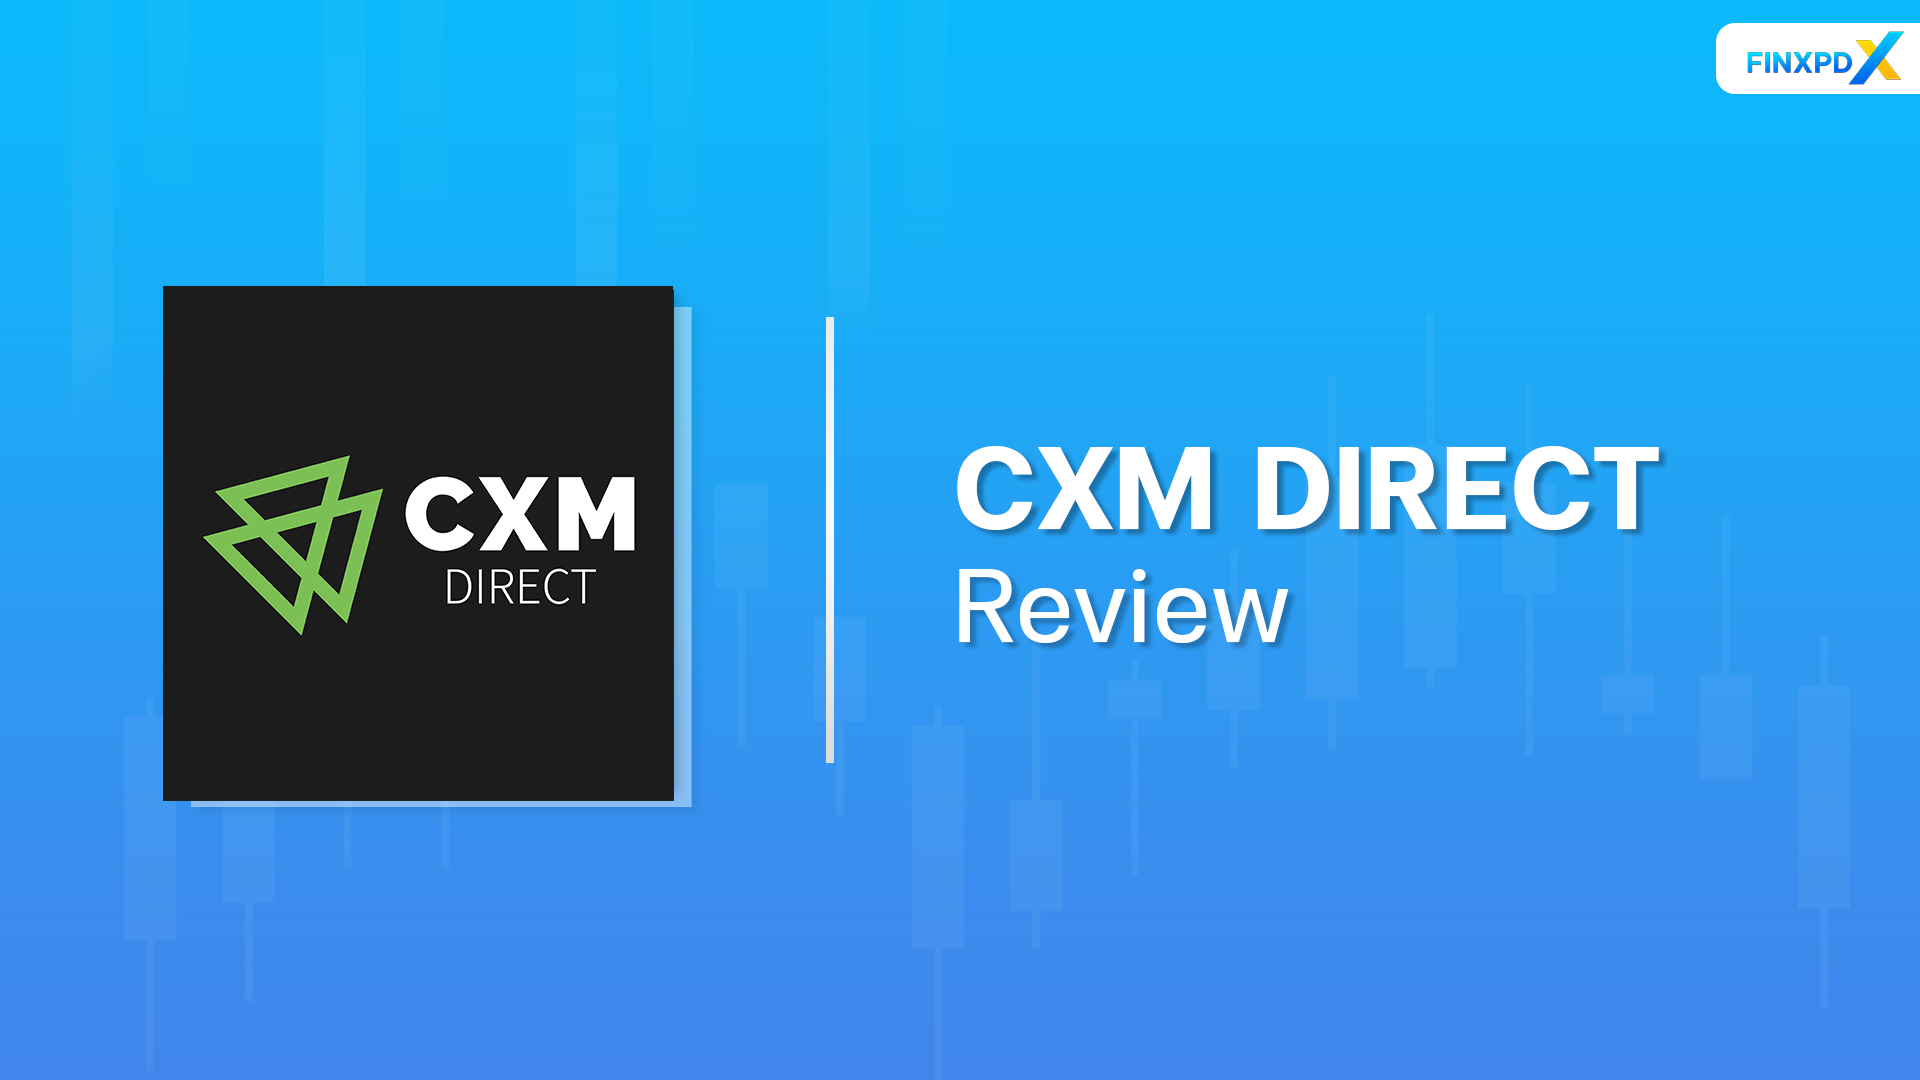 CXM Direct Review: Services, Features, and User Feedback